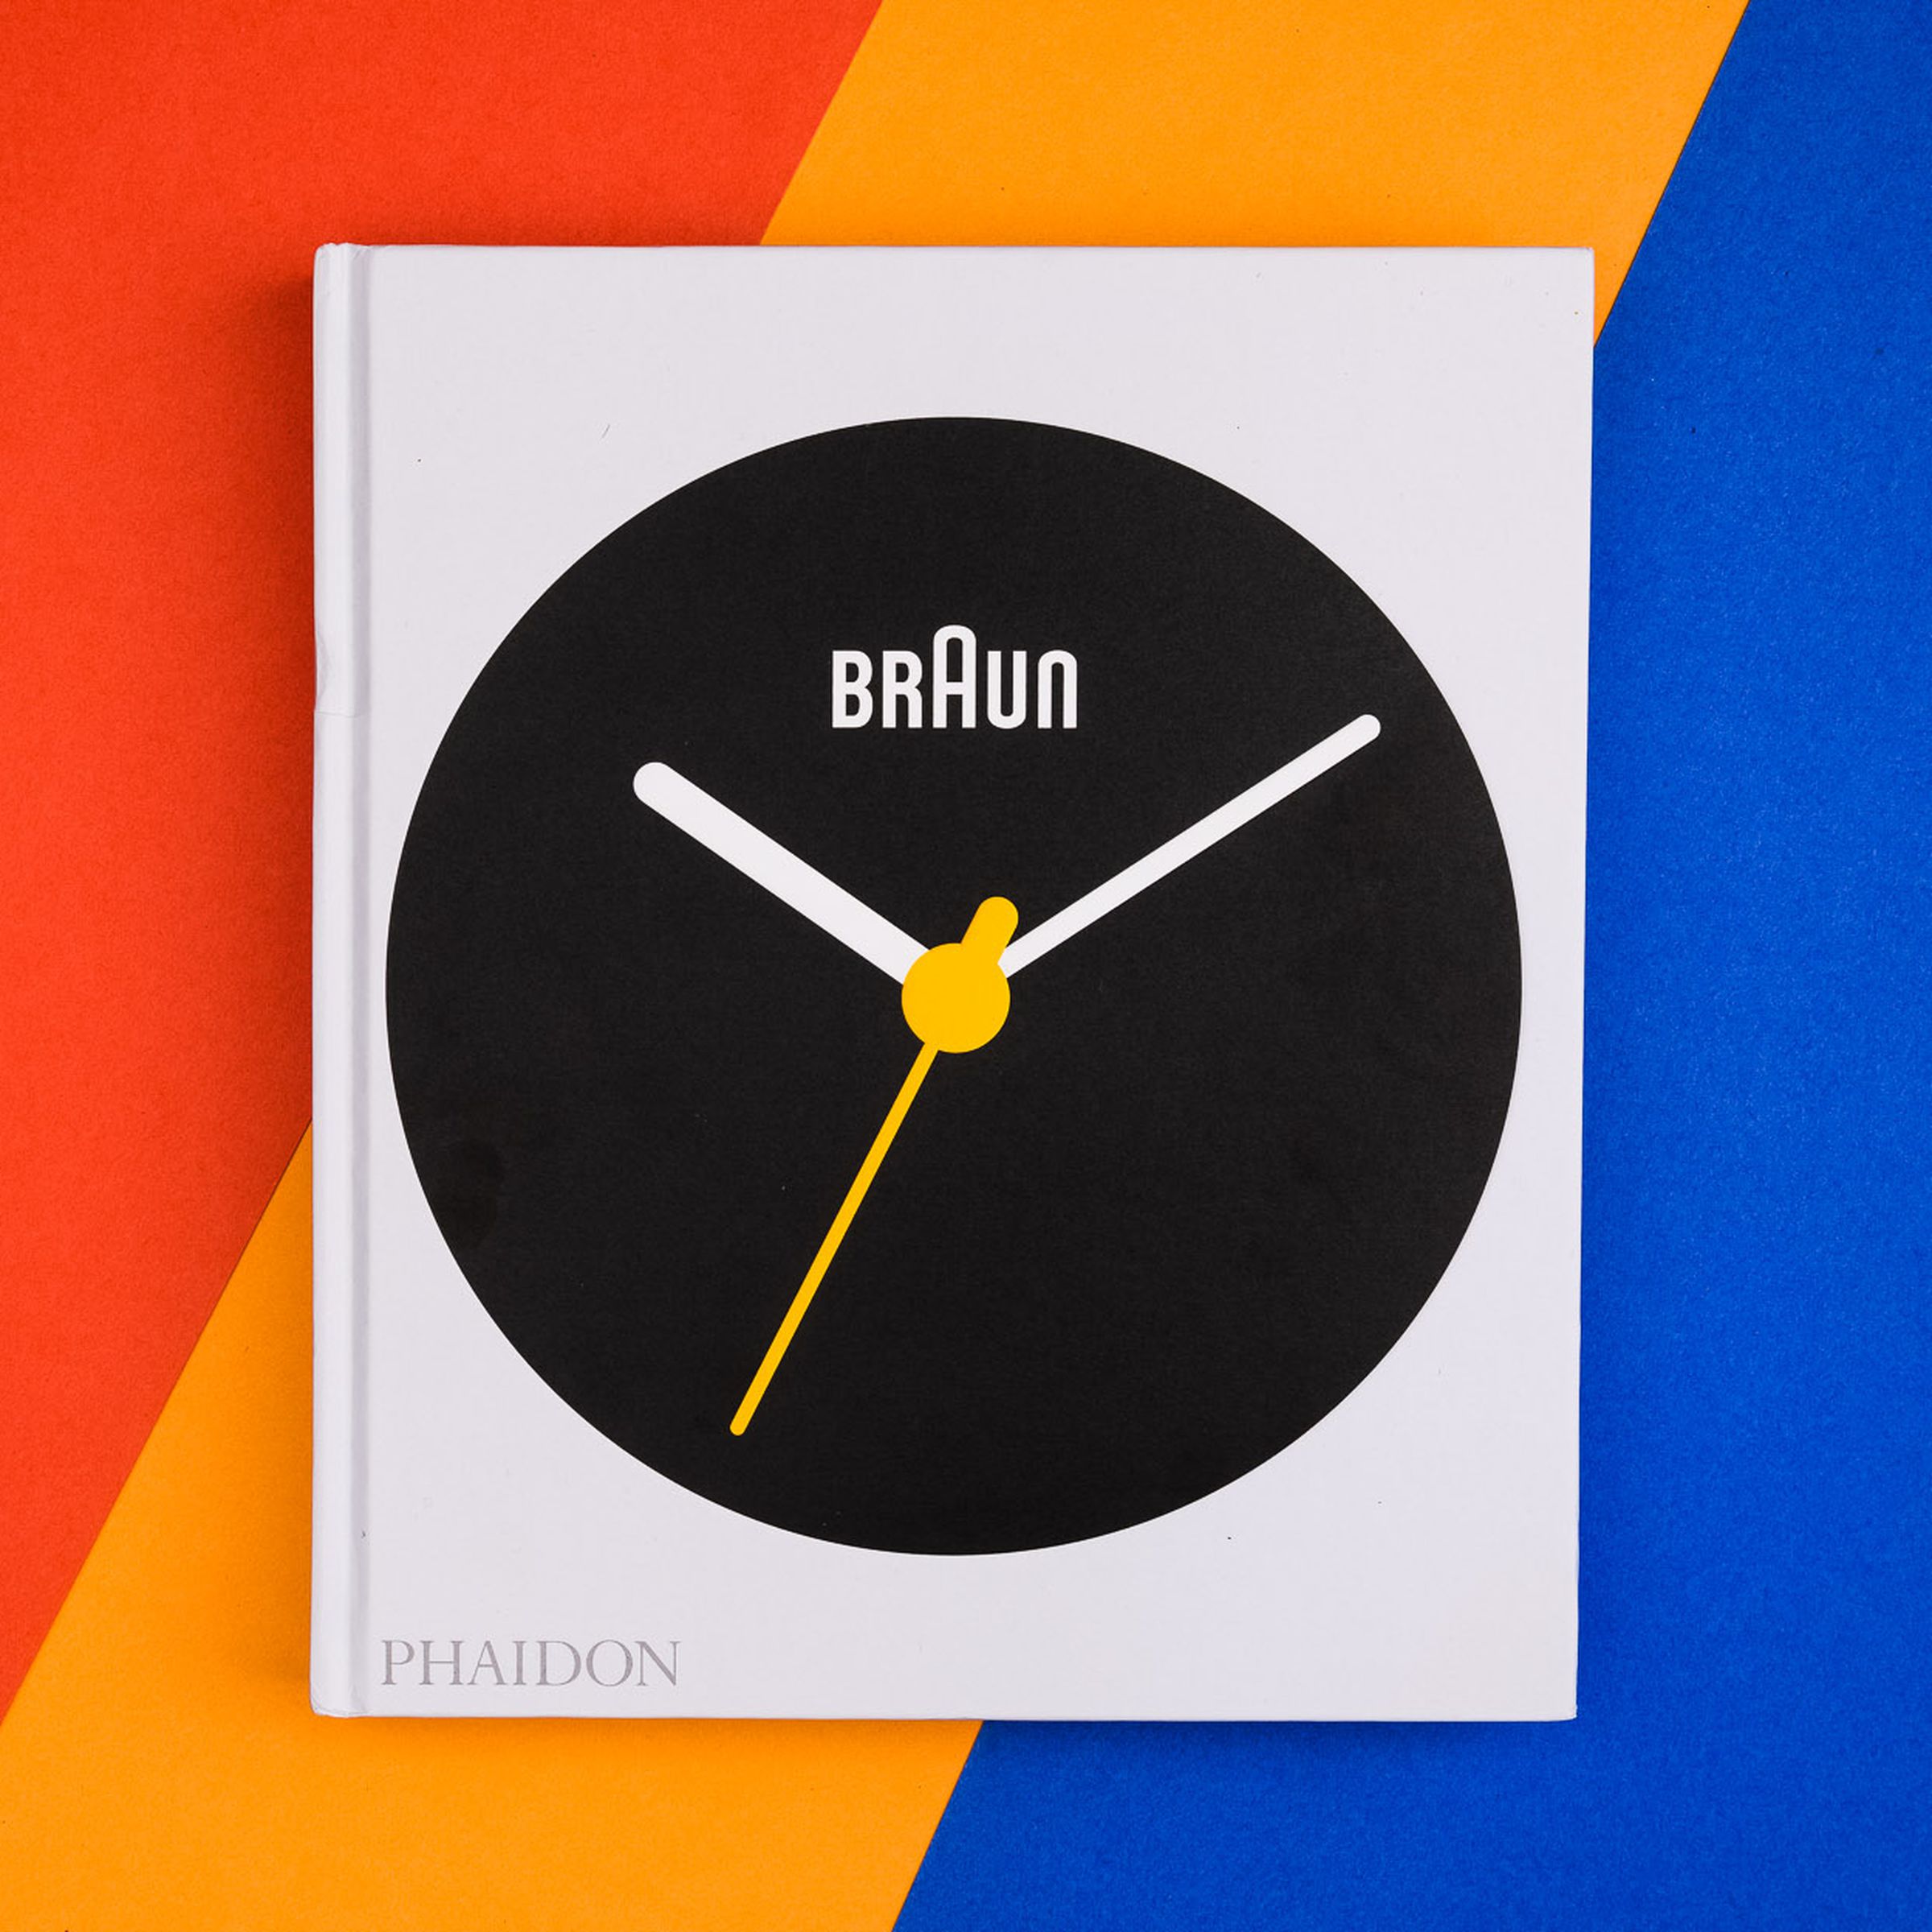 Photo of the cover of the book Braun: Designed to Keep, which features a large black Braun watchface with orange minute hand on white background. The book sits flat on a diagonally striped red, orange and blue table.